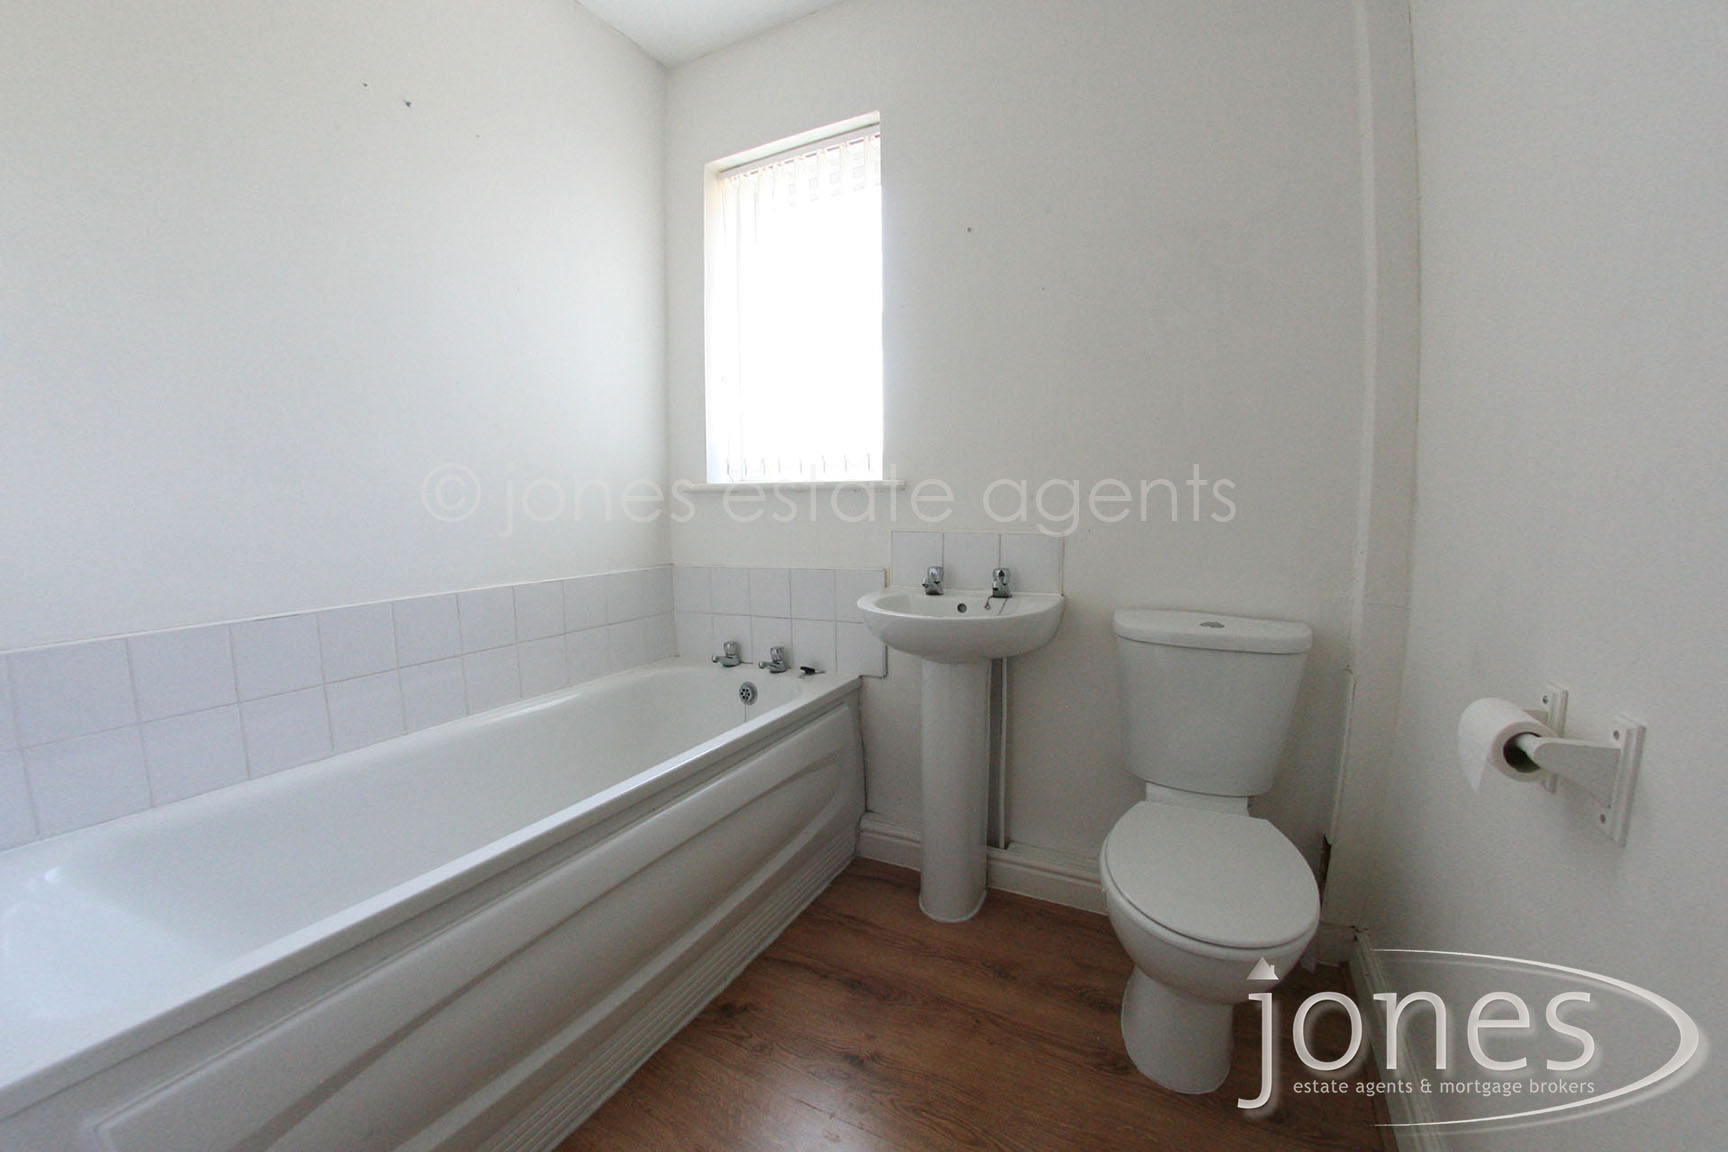 Home for Sale Let - Photo 08 North Road West,Wingate,TS28 5AP